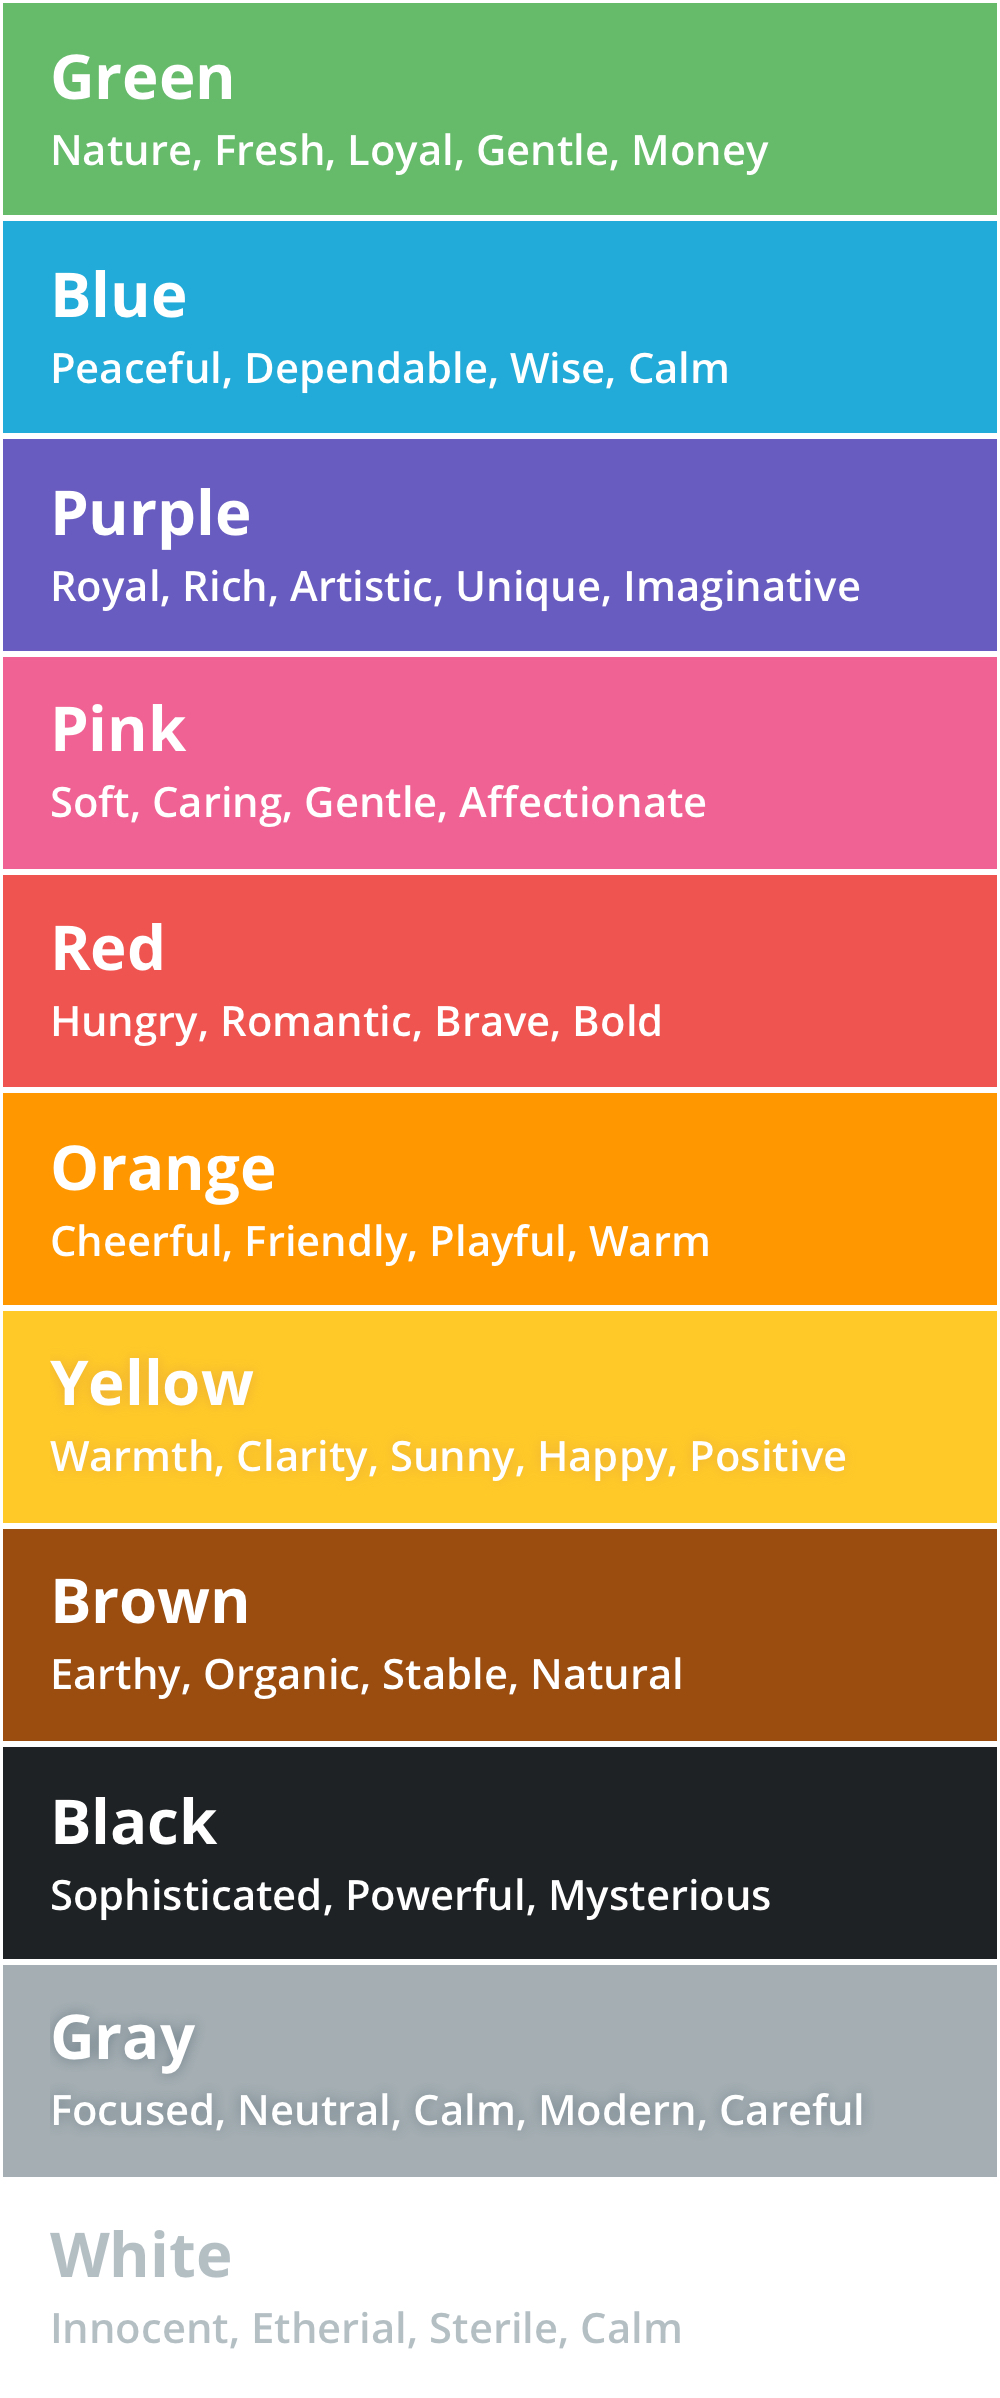 Color Psychology In Marketing: What Colors Mean and How to Use Them